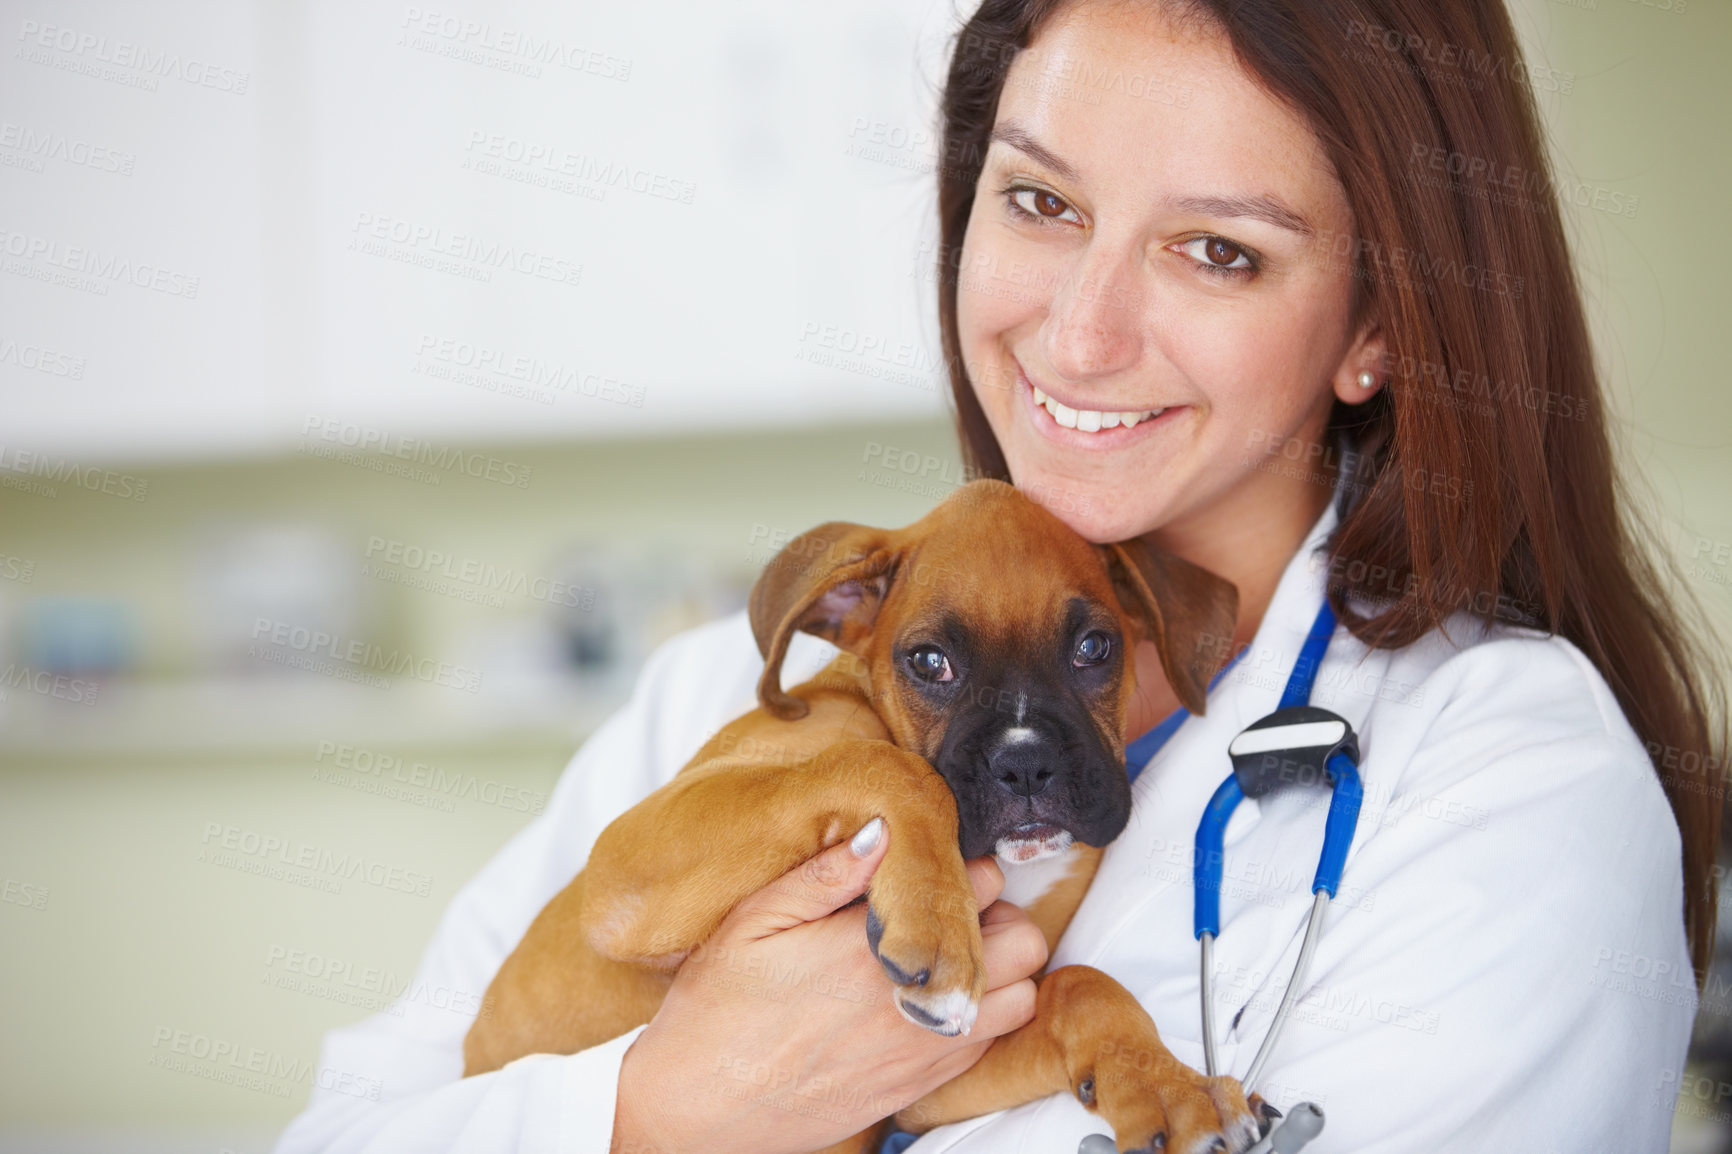 Buy stock photo Vet service portrait, dog and happy woman for medical help, wellness healing career or animal healthcare support. Veterinary aid, specialist trust and veterinarian smile for pet canine health care